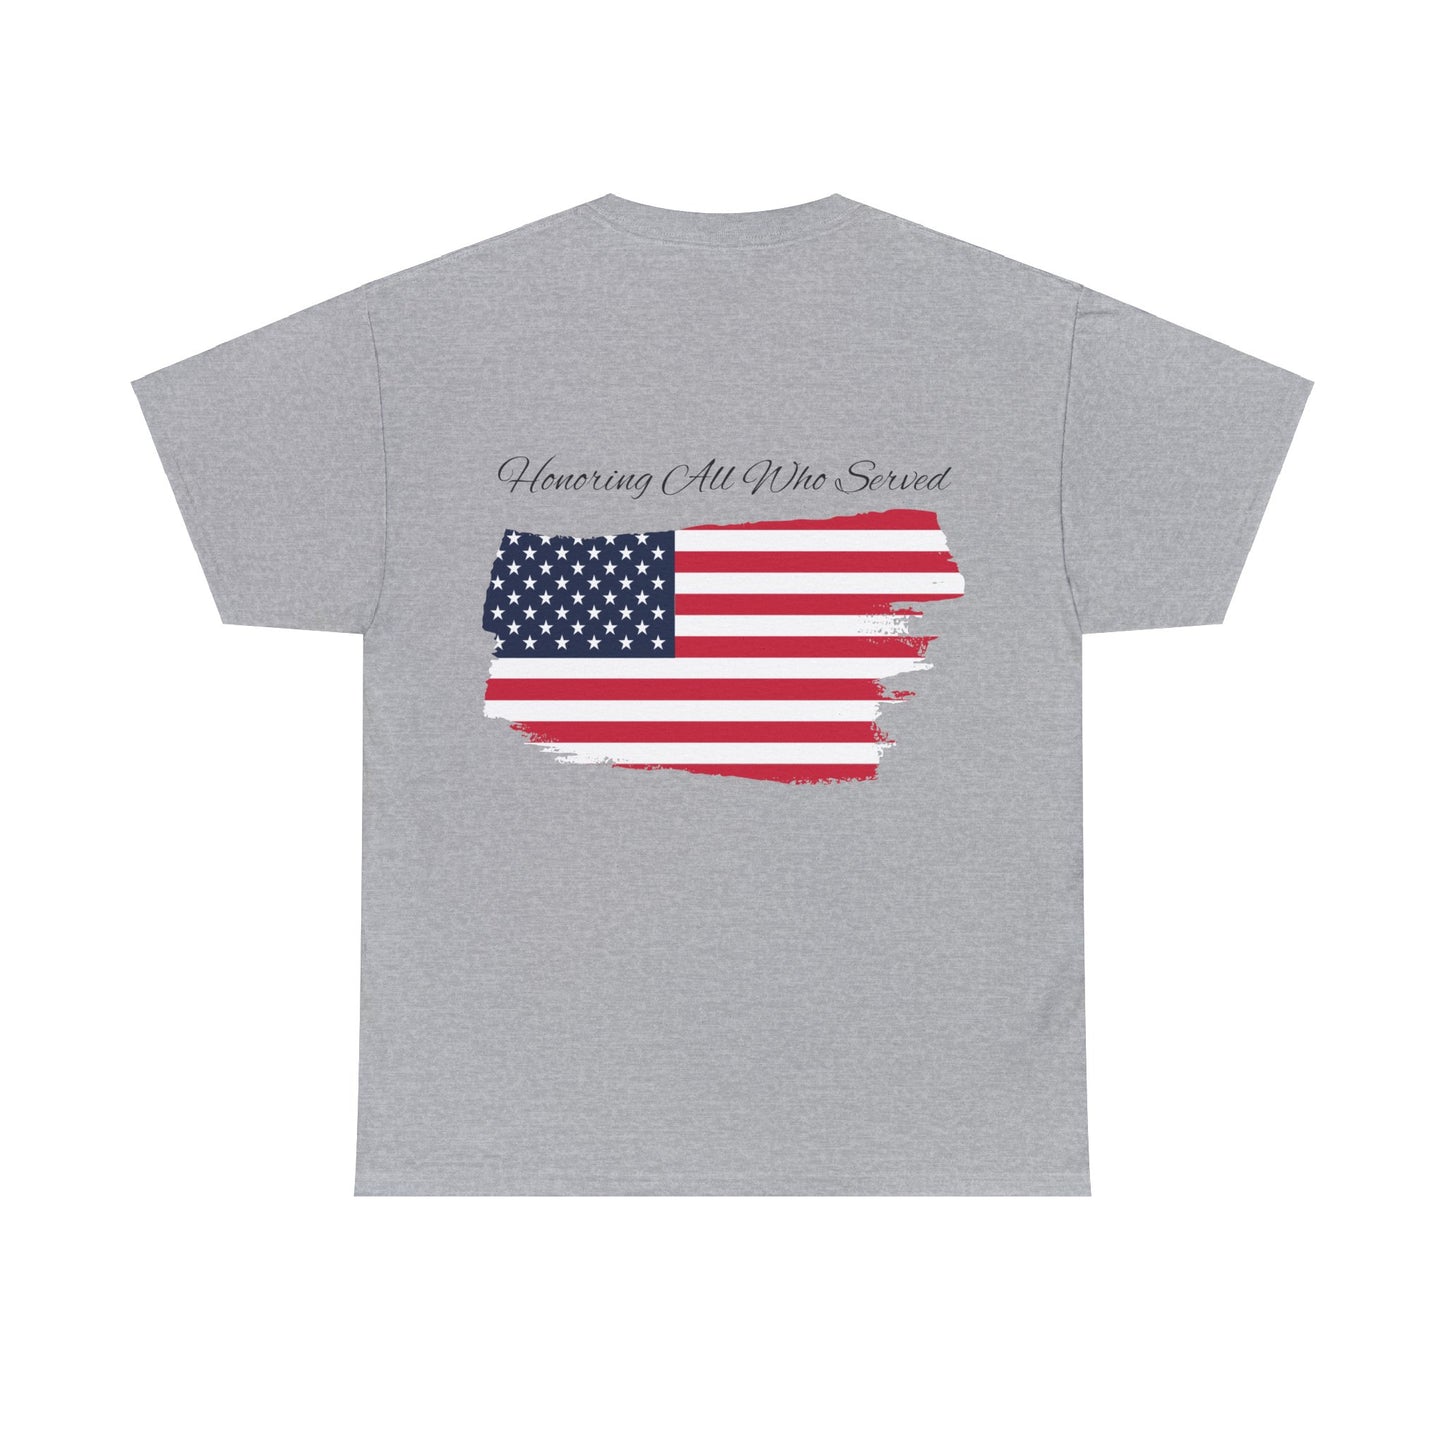 Unisex cotton tee with 'Honoring All Who Served' print for veterans tribute26